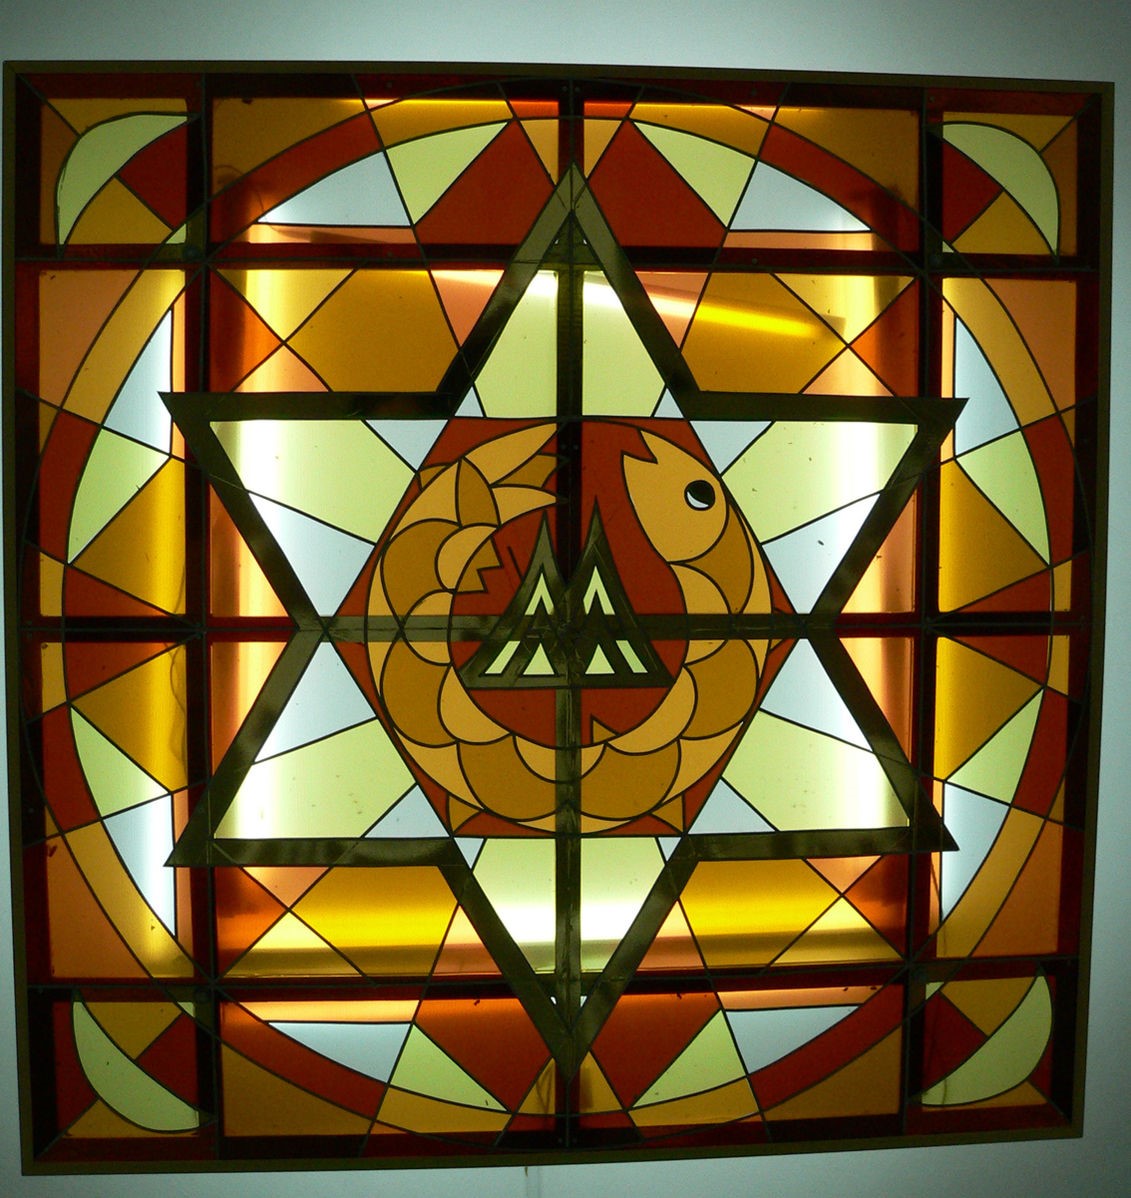 Michael Yachilevich, CC BY-SA 3.0, via Wikimedia Commons- Stained-glass windows of synagoguesSynagogues in Ma'ale AdumimMichail YachilevichLeviathanStar of David on stained-glass windowsStained-glass windows in Israel